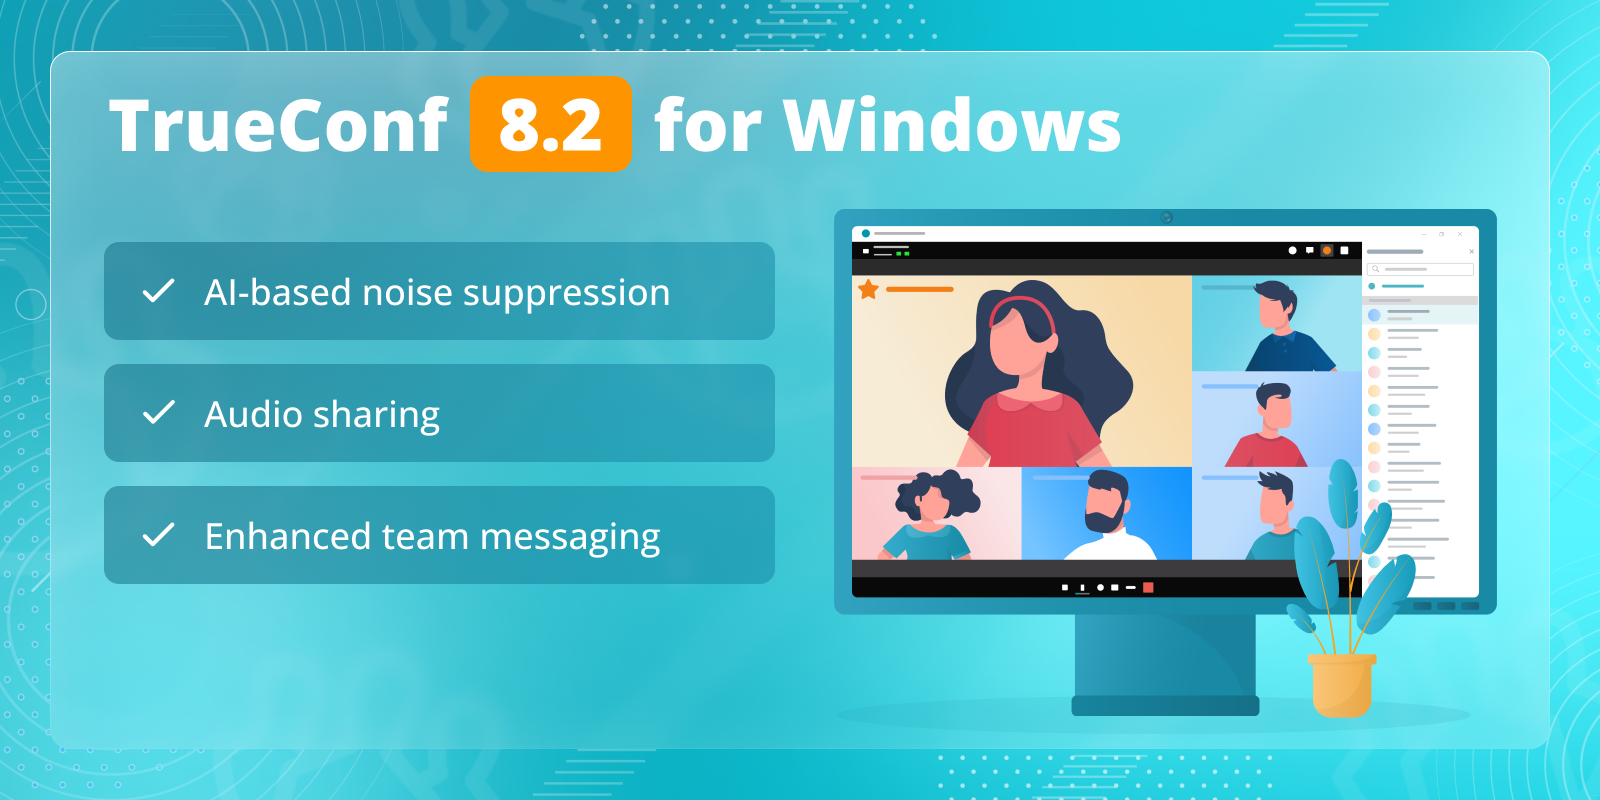 TrueConf 8.2 for Windows: AI-based noise suppression, enhanced team messaging, and audio sharing 5